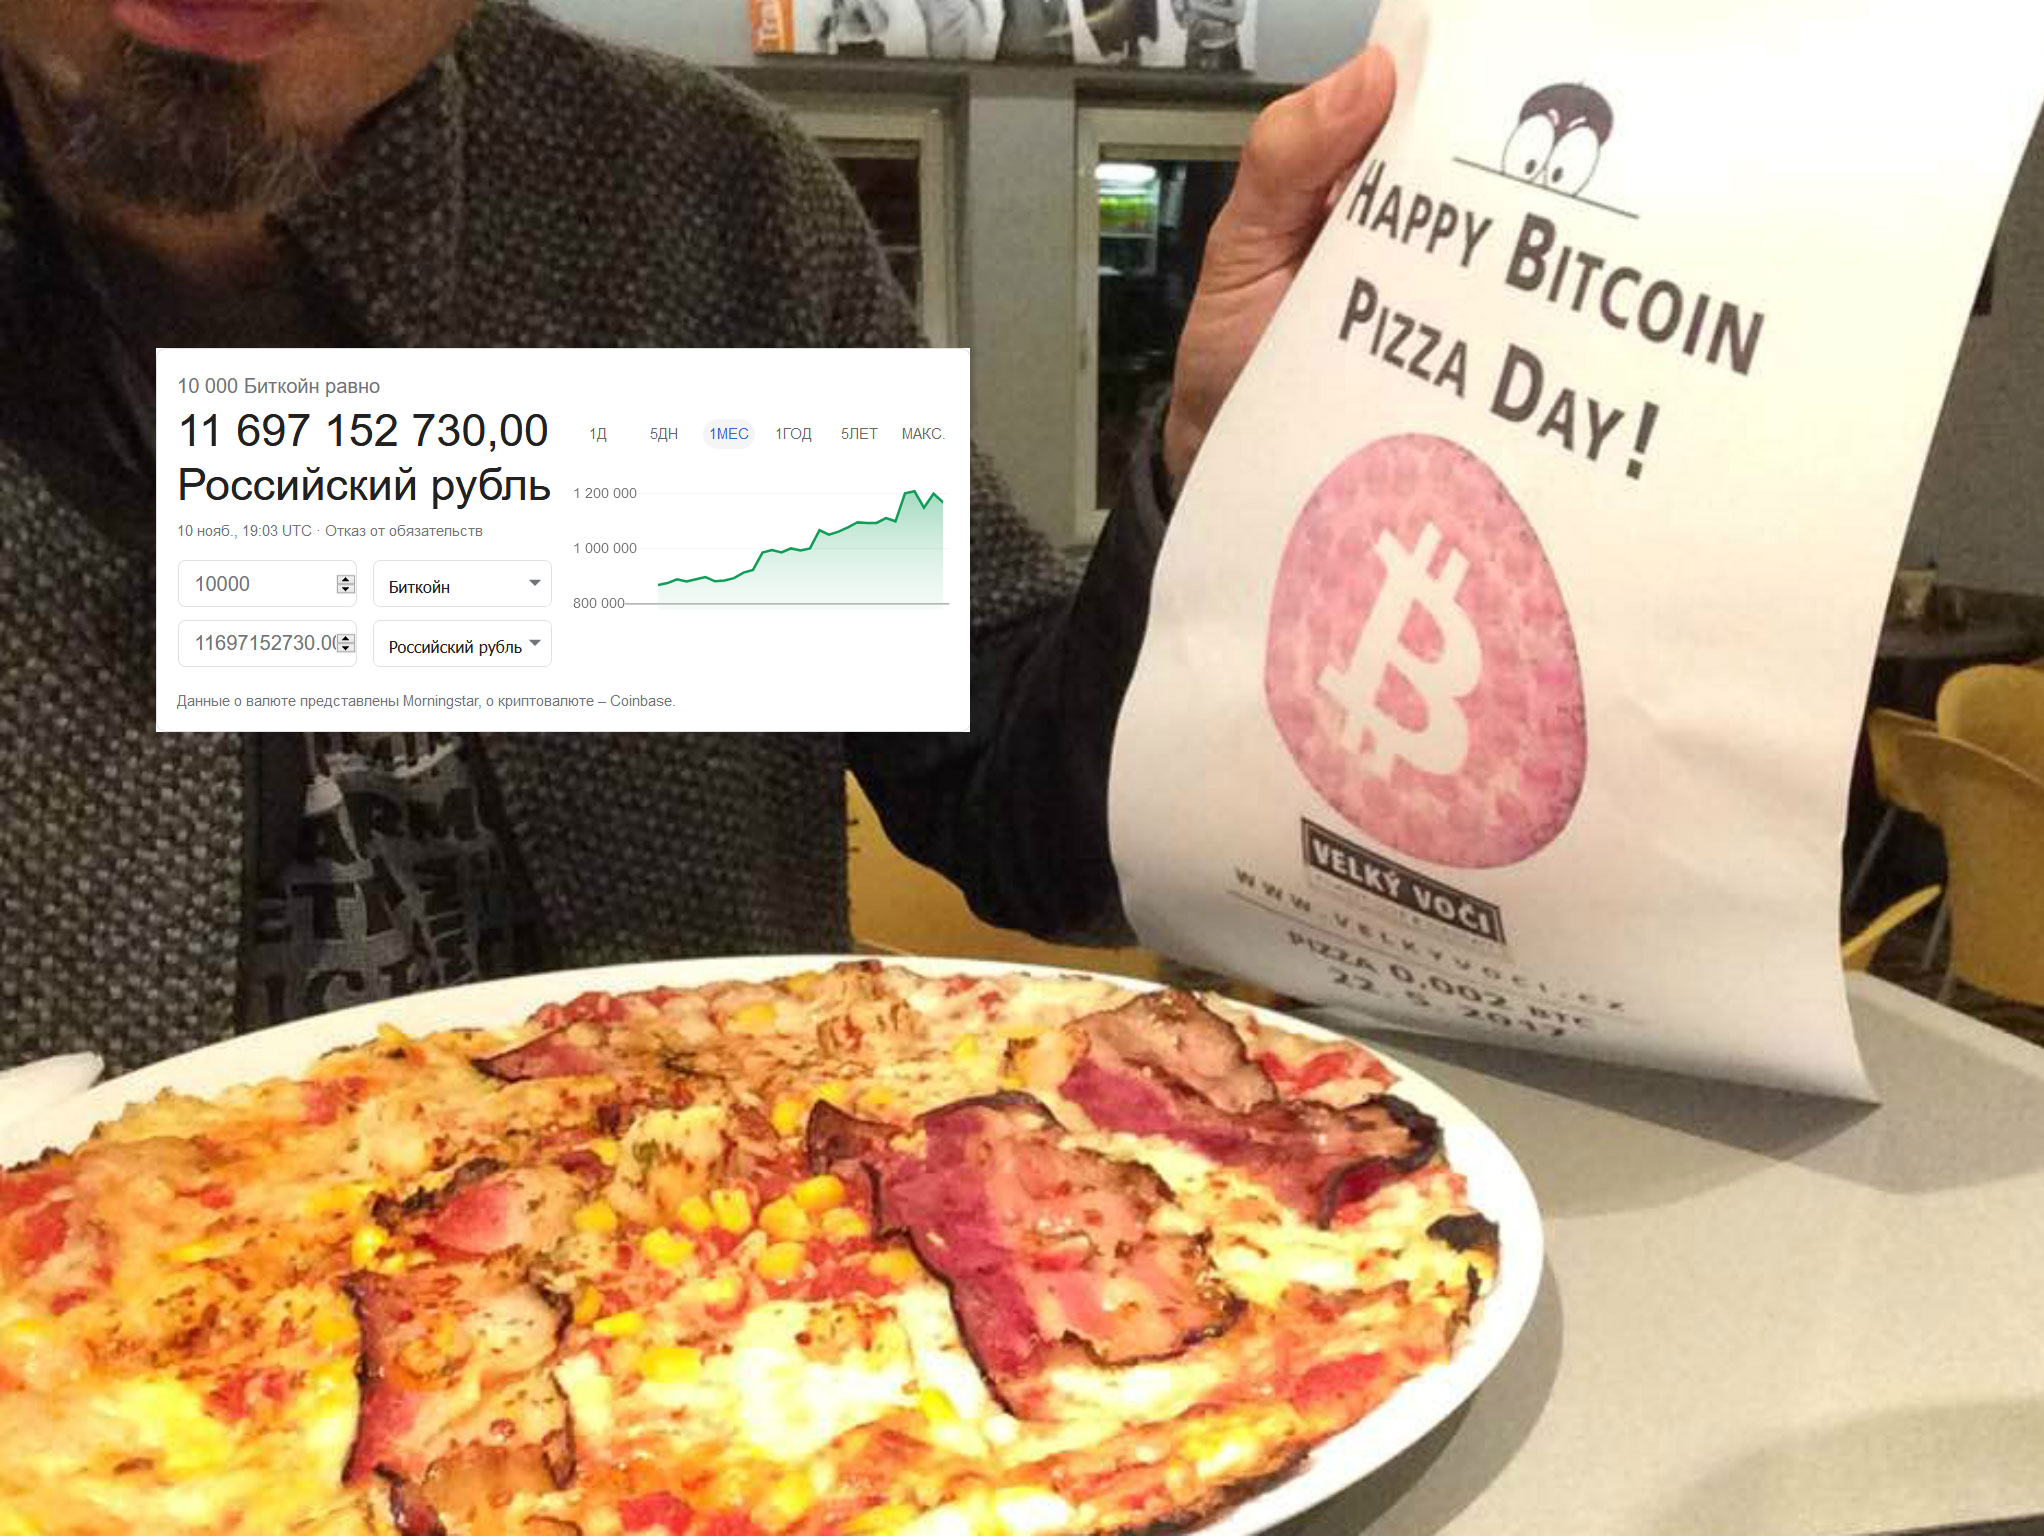 10k bitcoin pizza nrl betting odds round 2 2022